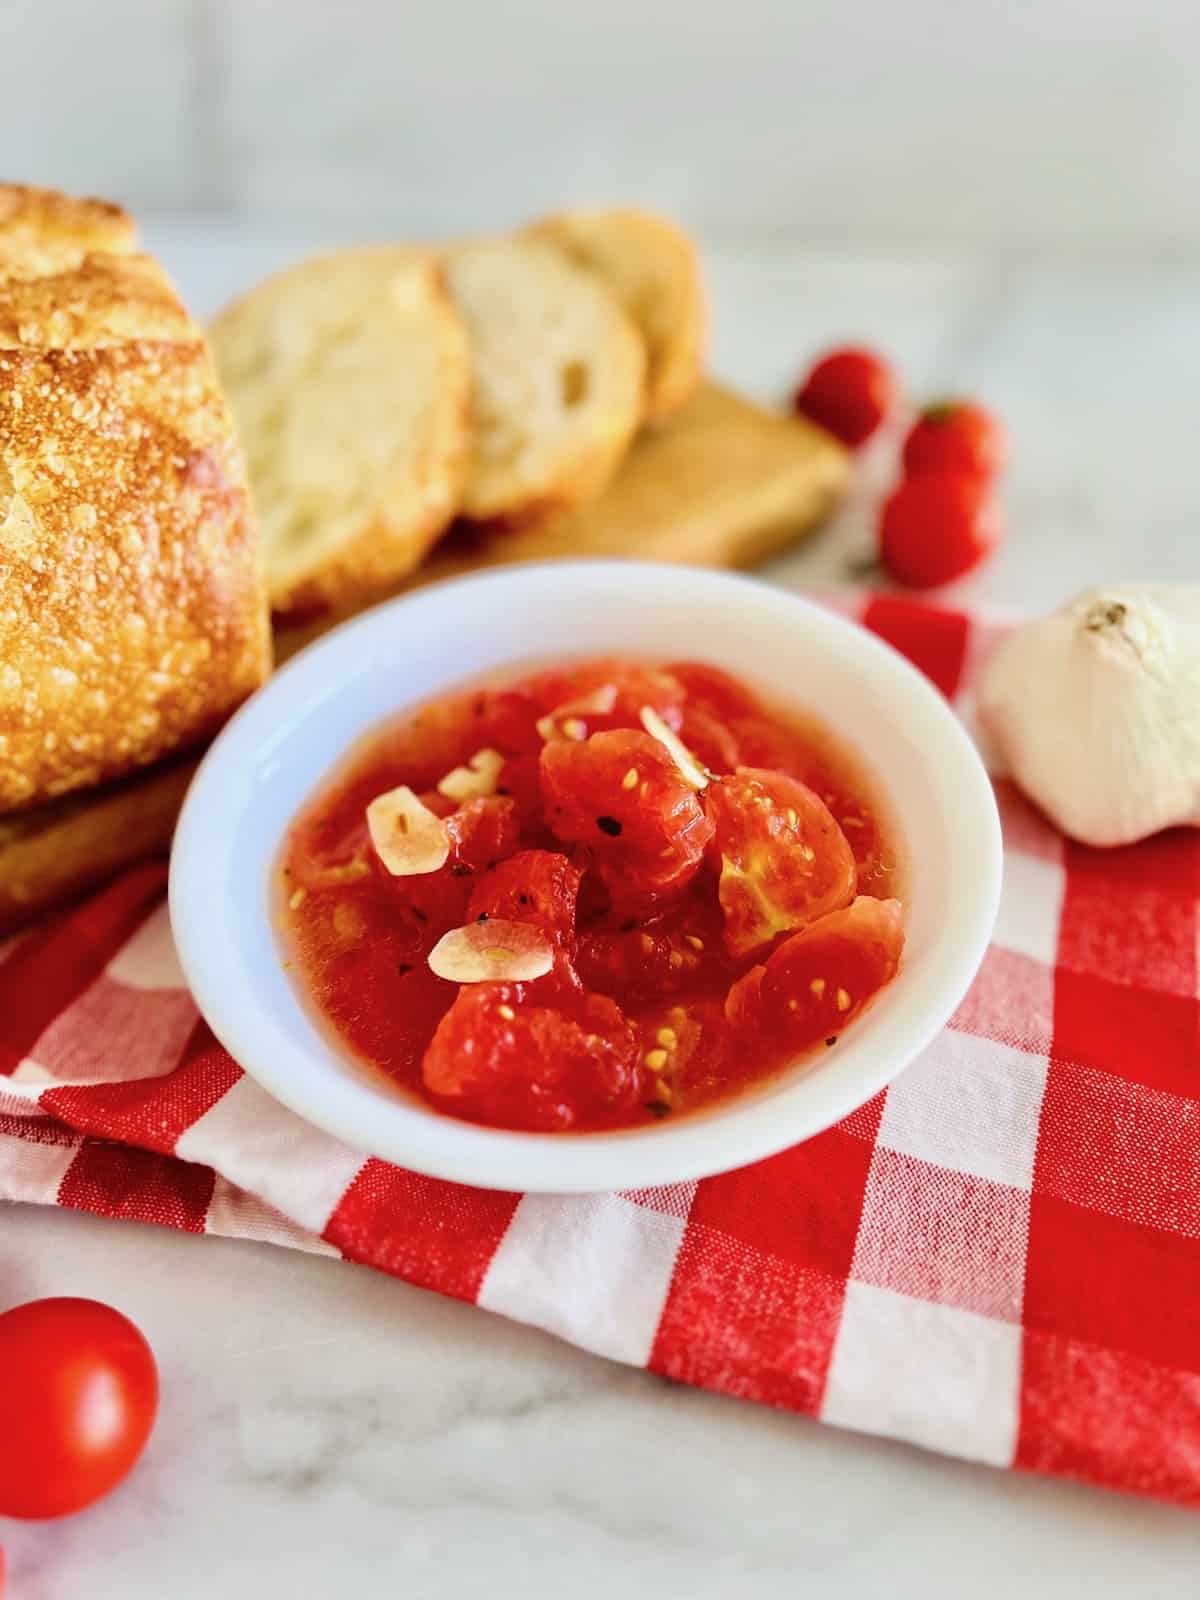 Italian Marinated Tomatoes in a serving bowl next to a cutting board with freshly sliced bread for dipping or topping.